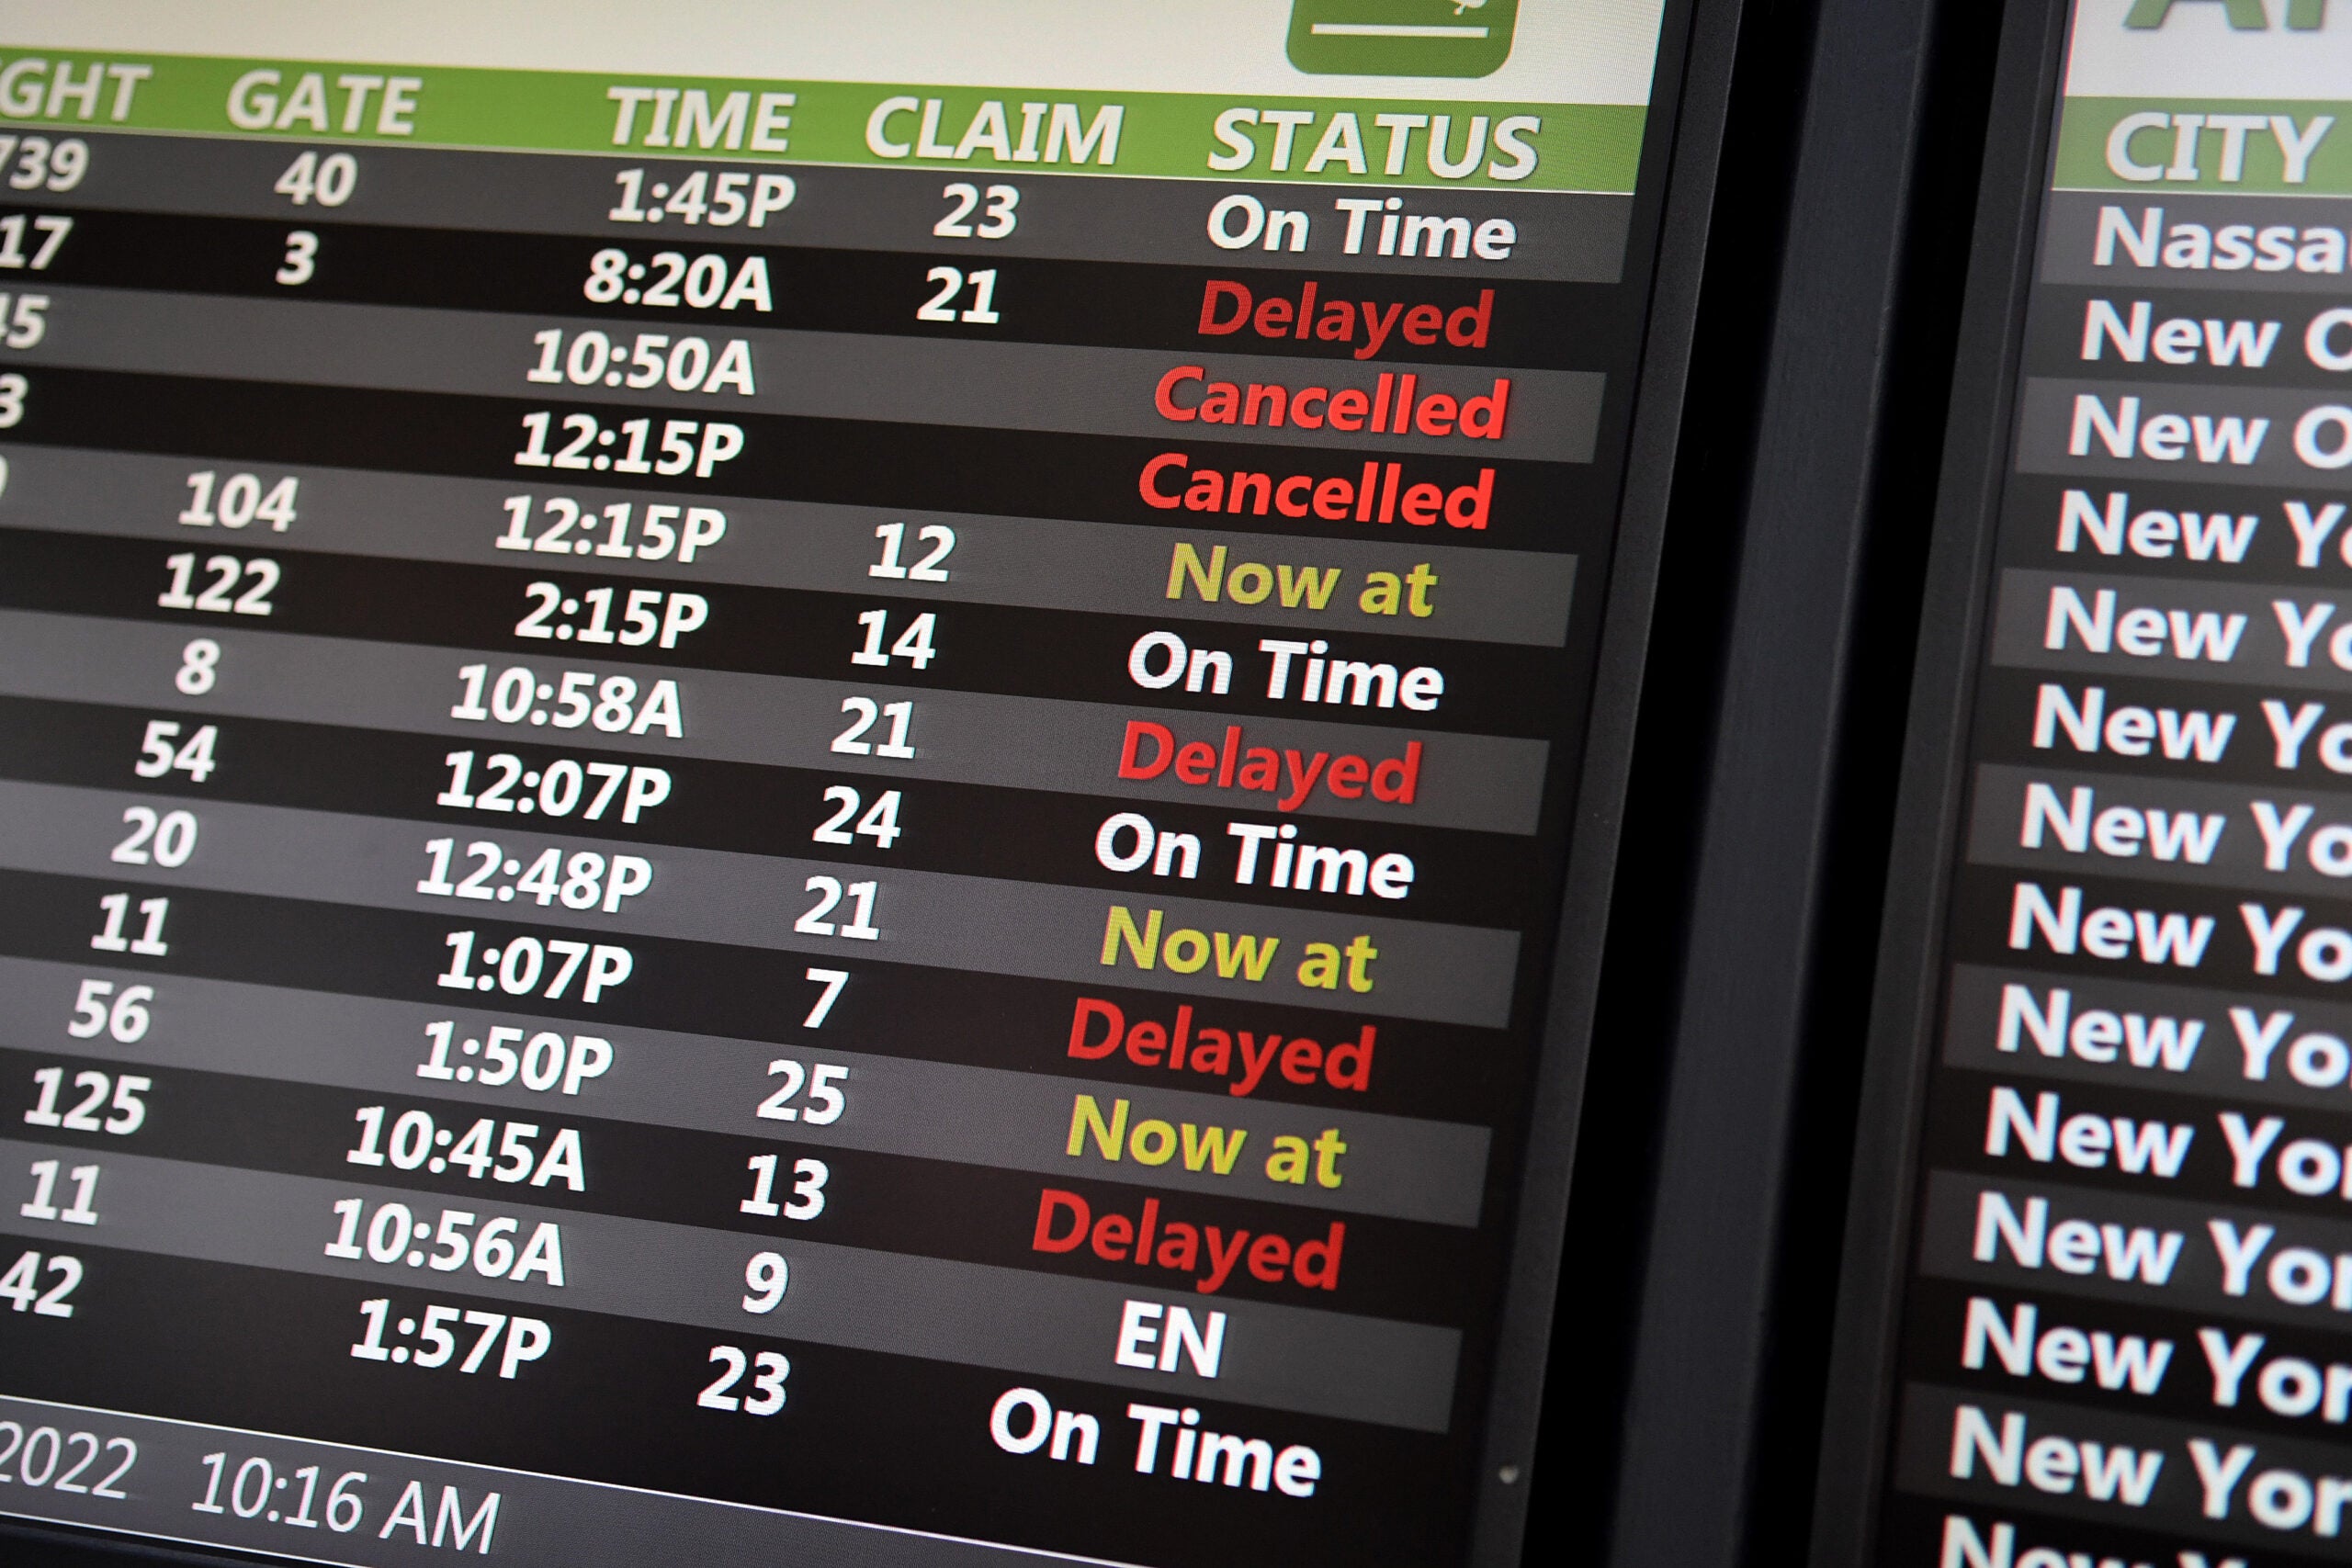 Over 1,500 flight cancellations today due to Winter Storm Olive, more expected Thursday